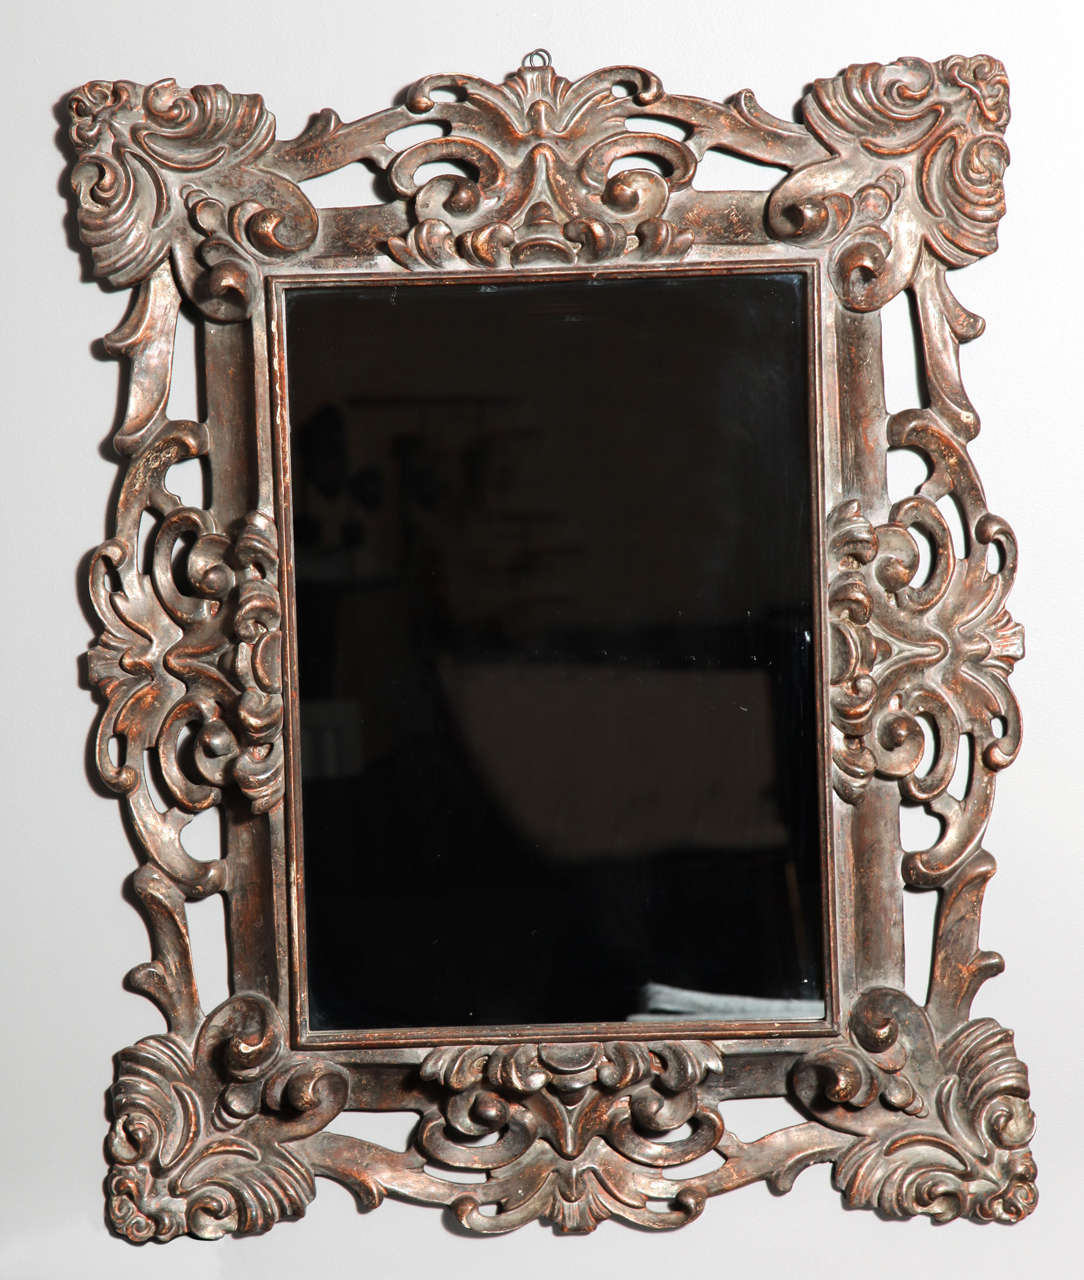 A richly hand-carved frame with openwork floral and foliate design in a distressed silver finish.